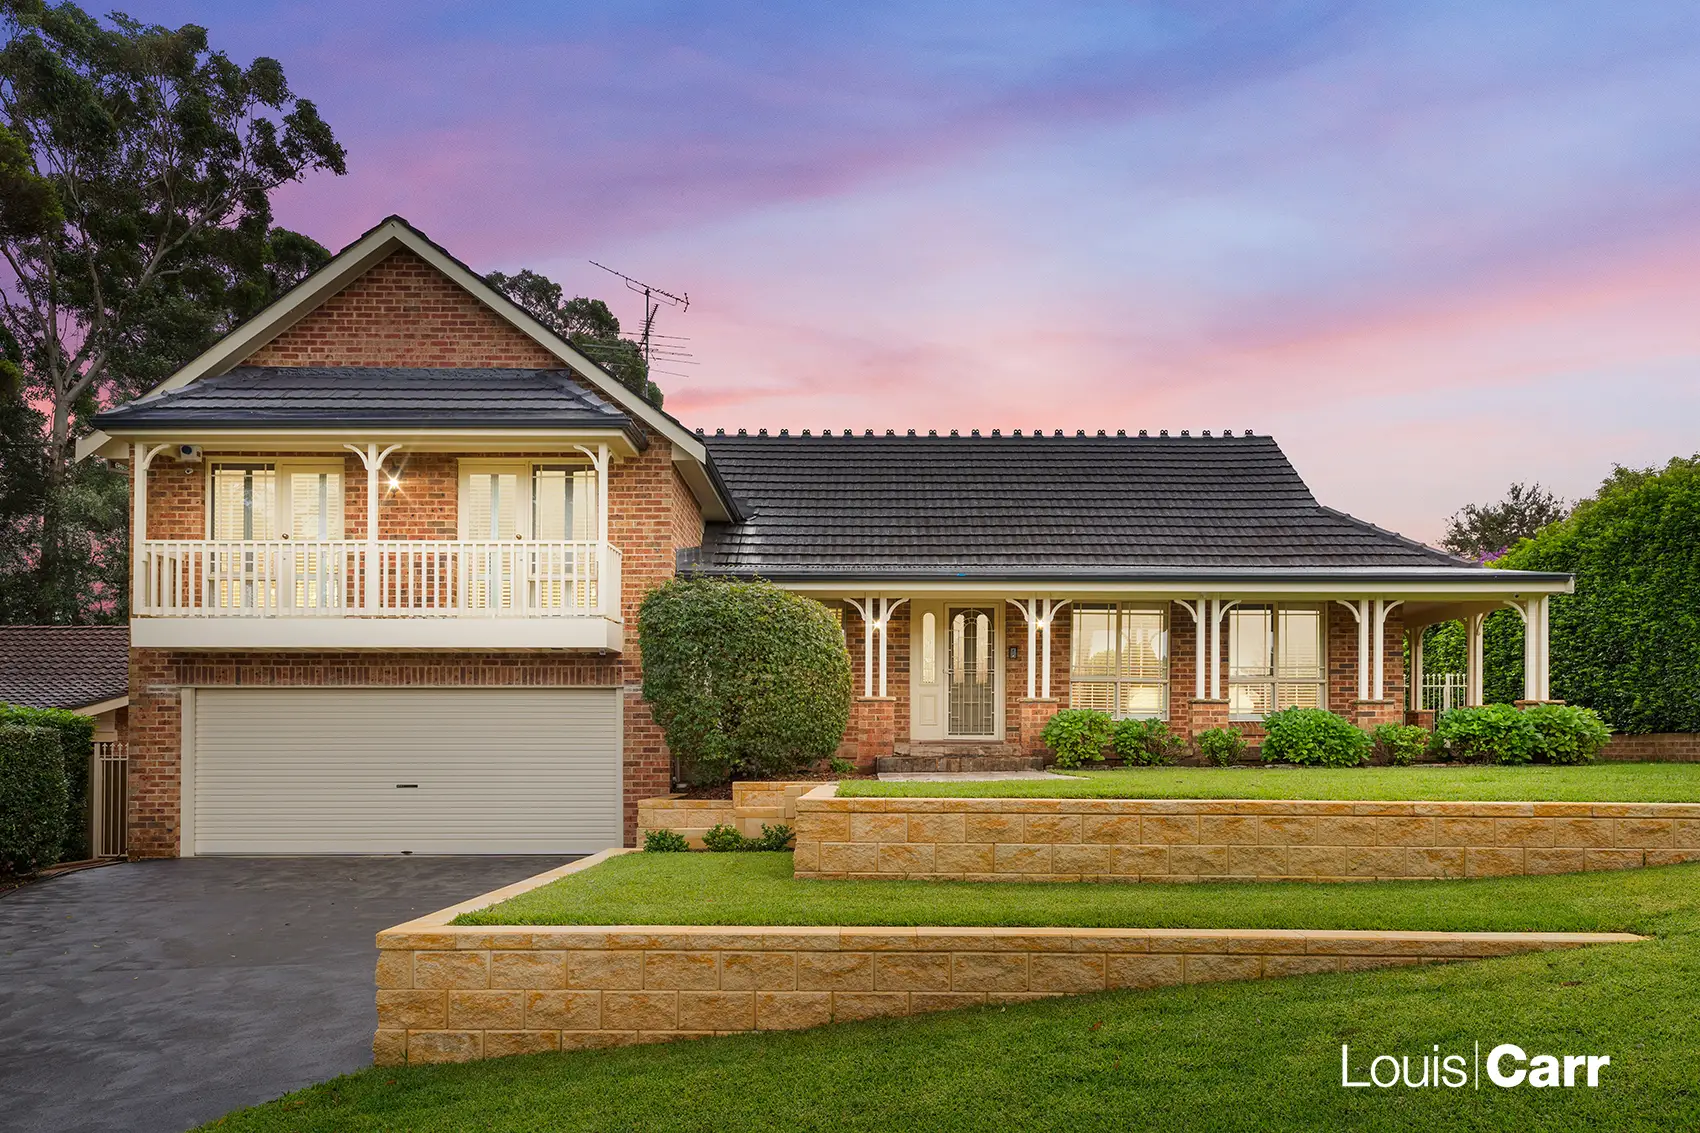 Photo #15: 34 Yaringa Road, Castle Hill - Sold by Louis Carr Real Estate